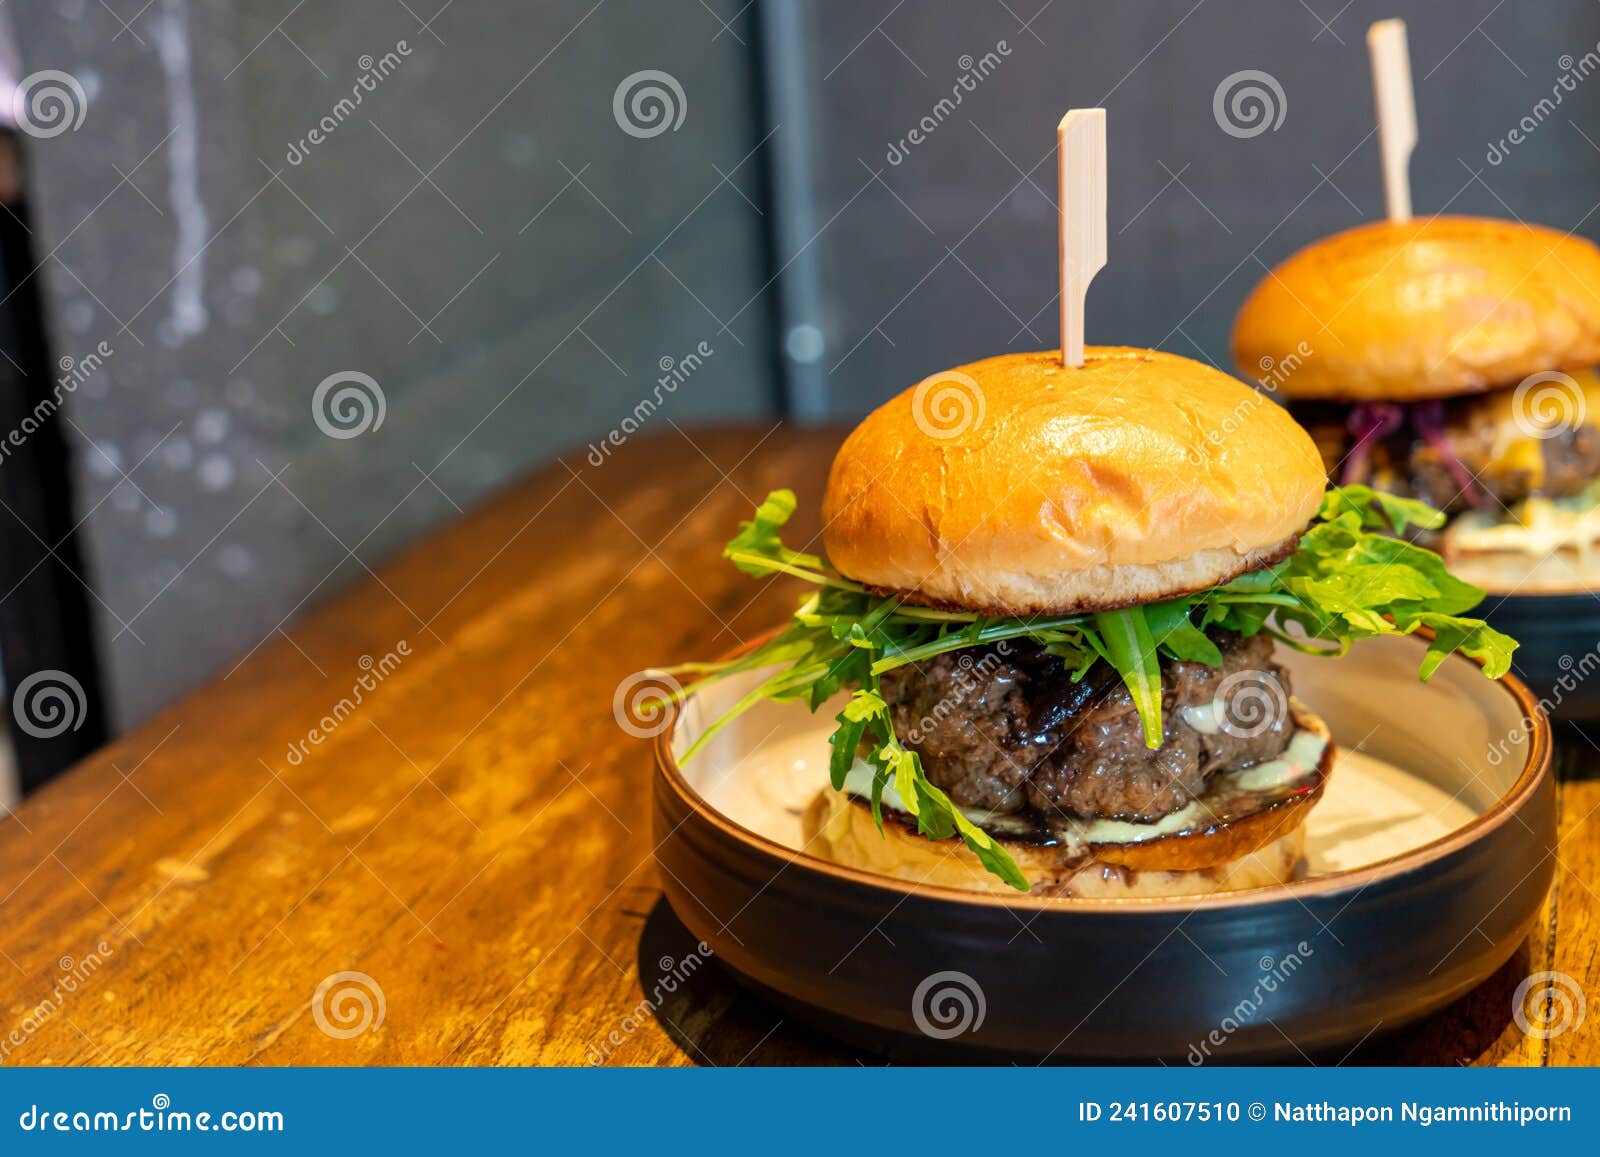 Beef Burger with Cheese on Plate Stock Photo - Image of grilled, fresh ...